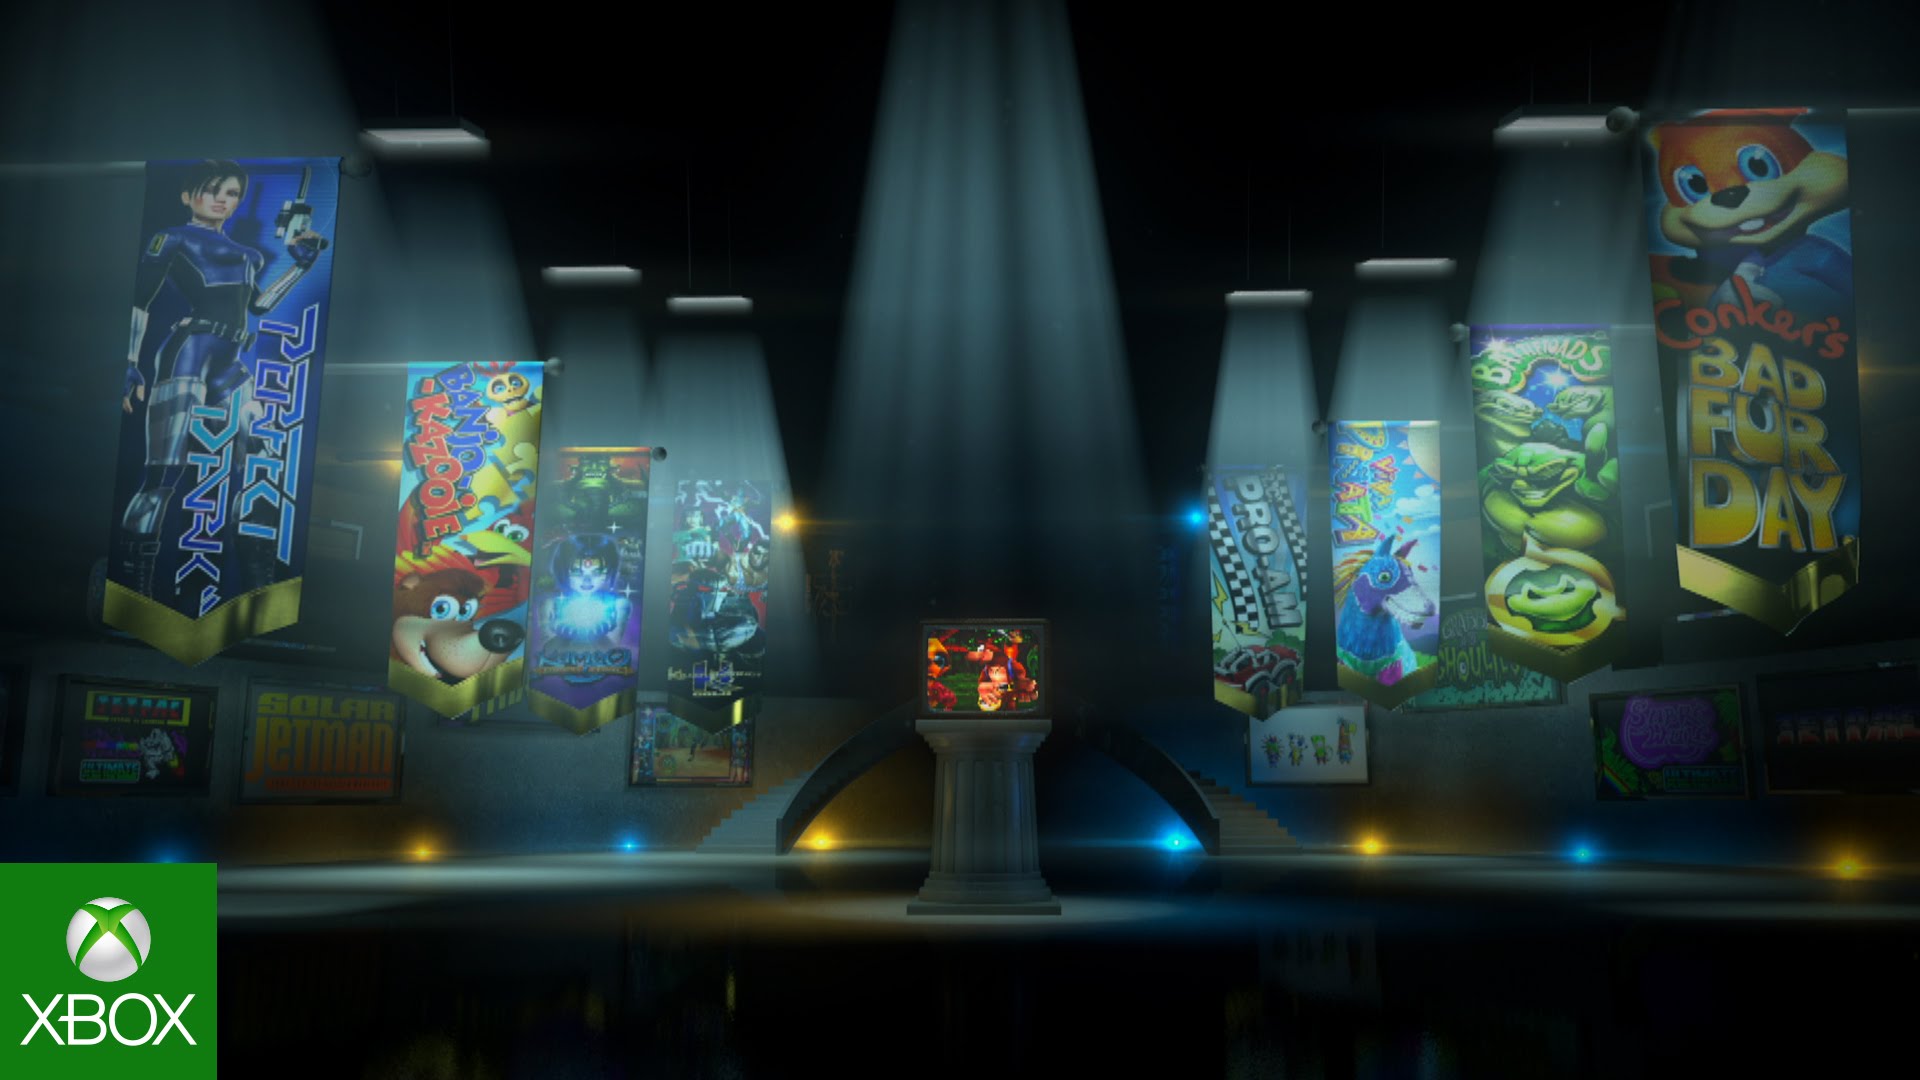 Video For Six Rare Replay Titles We Can’t Wait to Replay